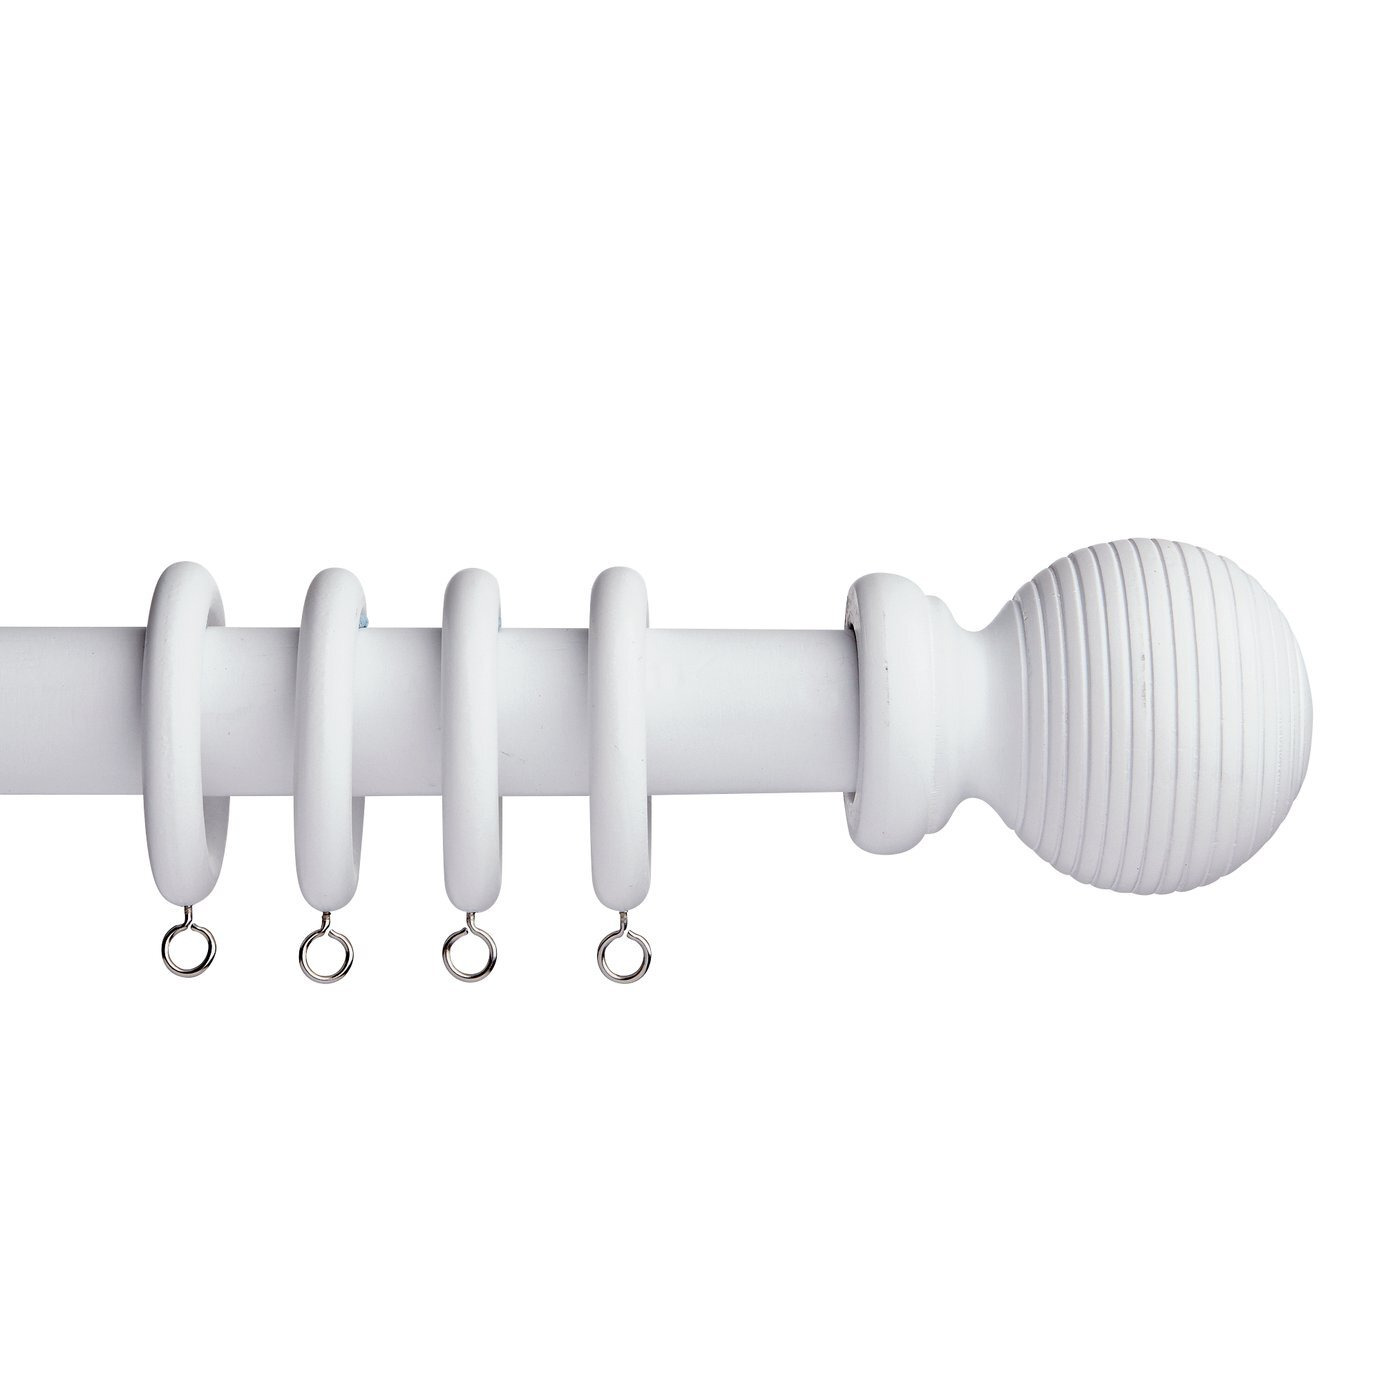 Argos Home 3m Grooved Ball Wooden Curtain Pole - White - image 1